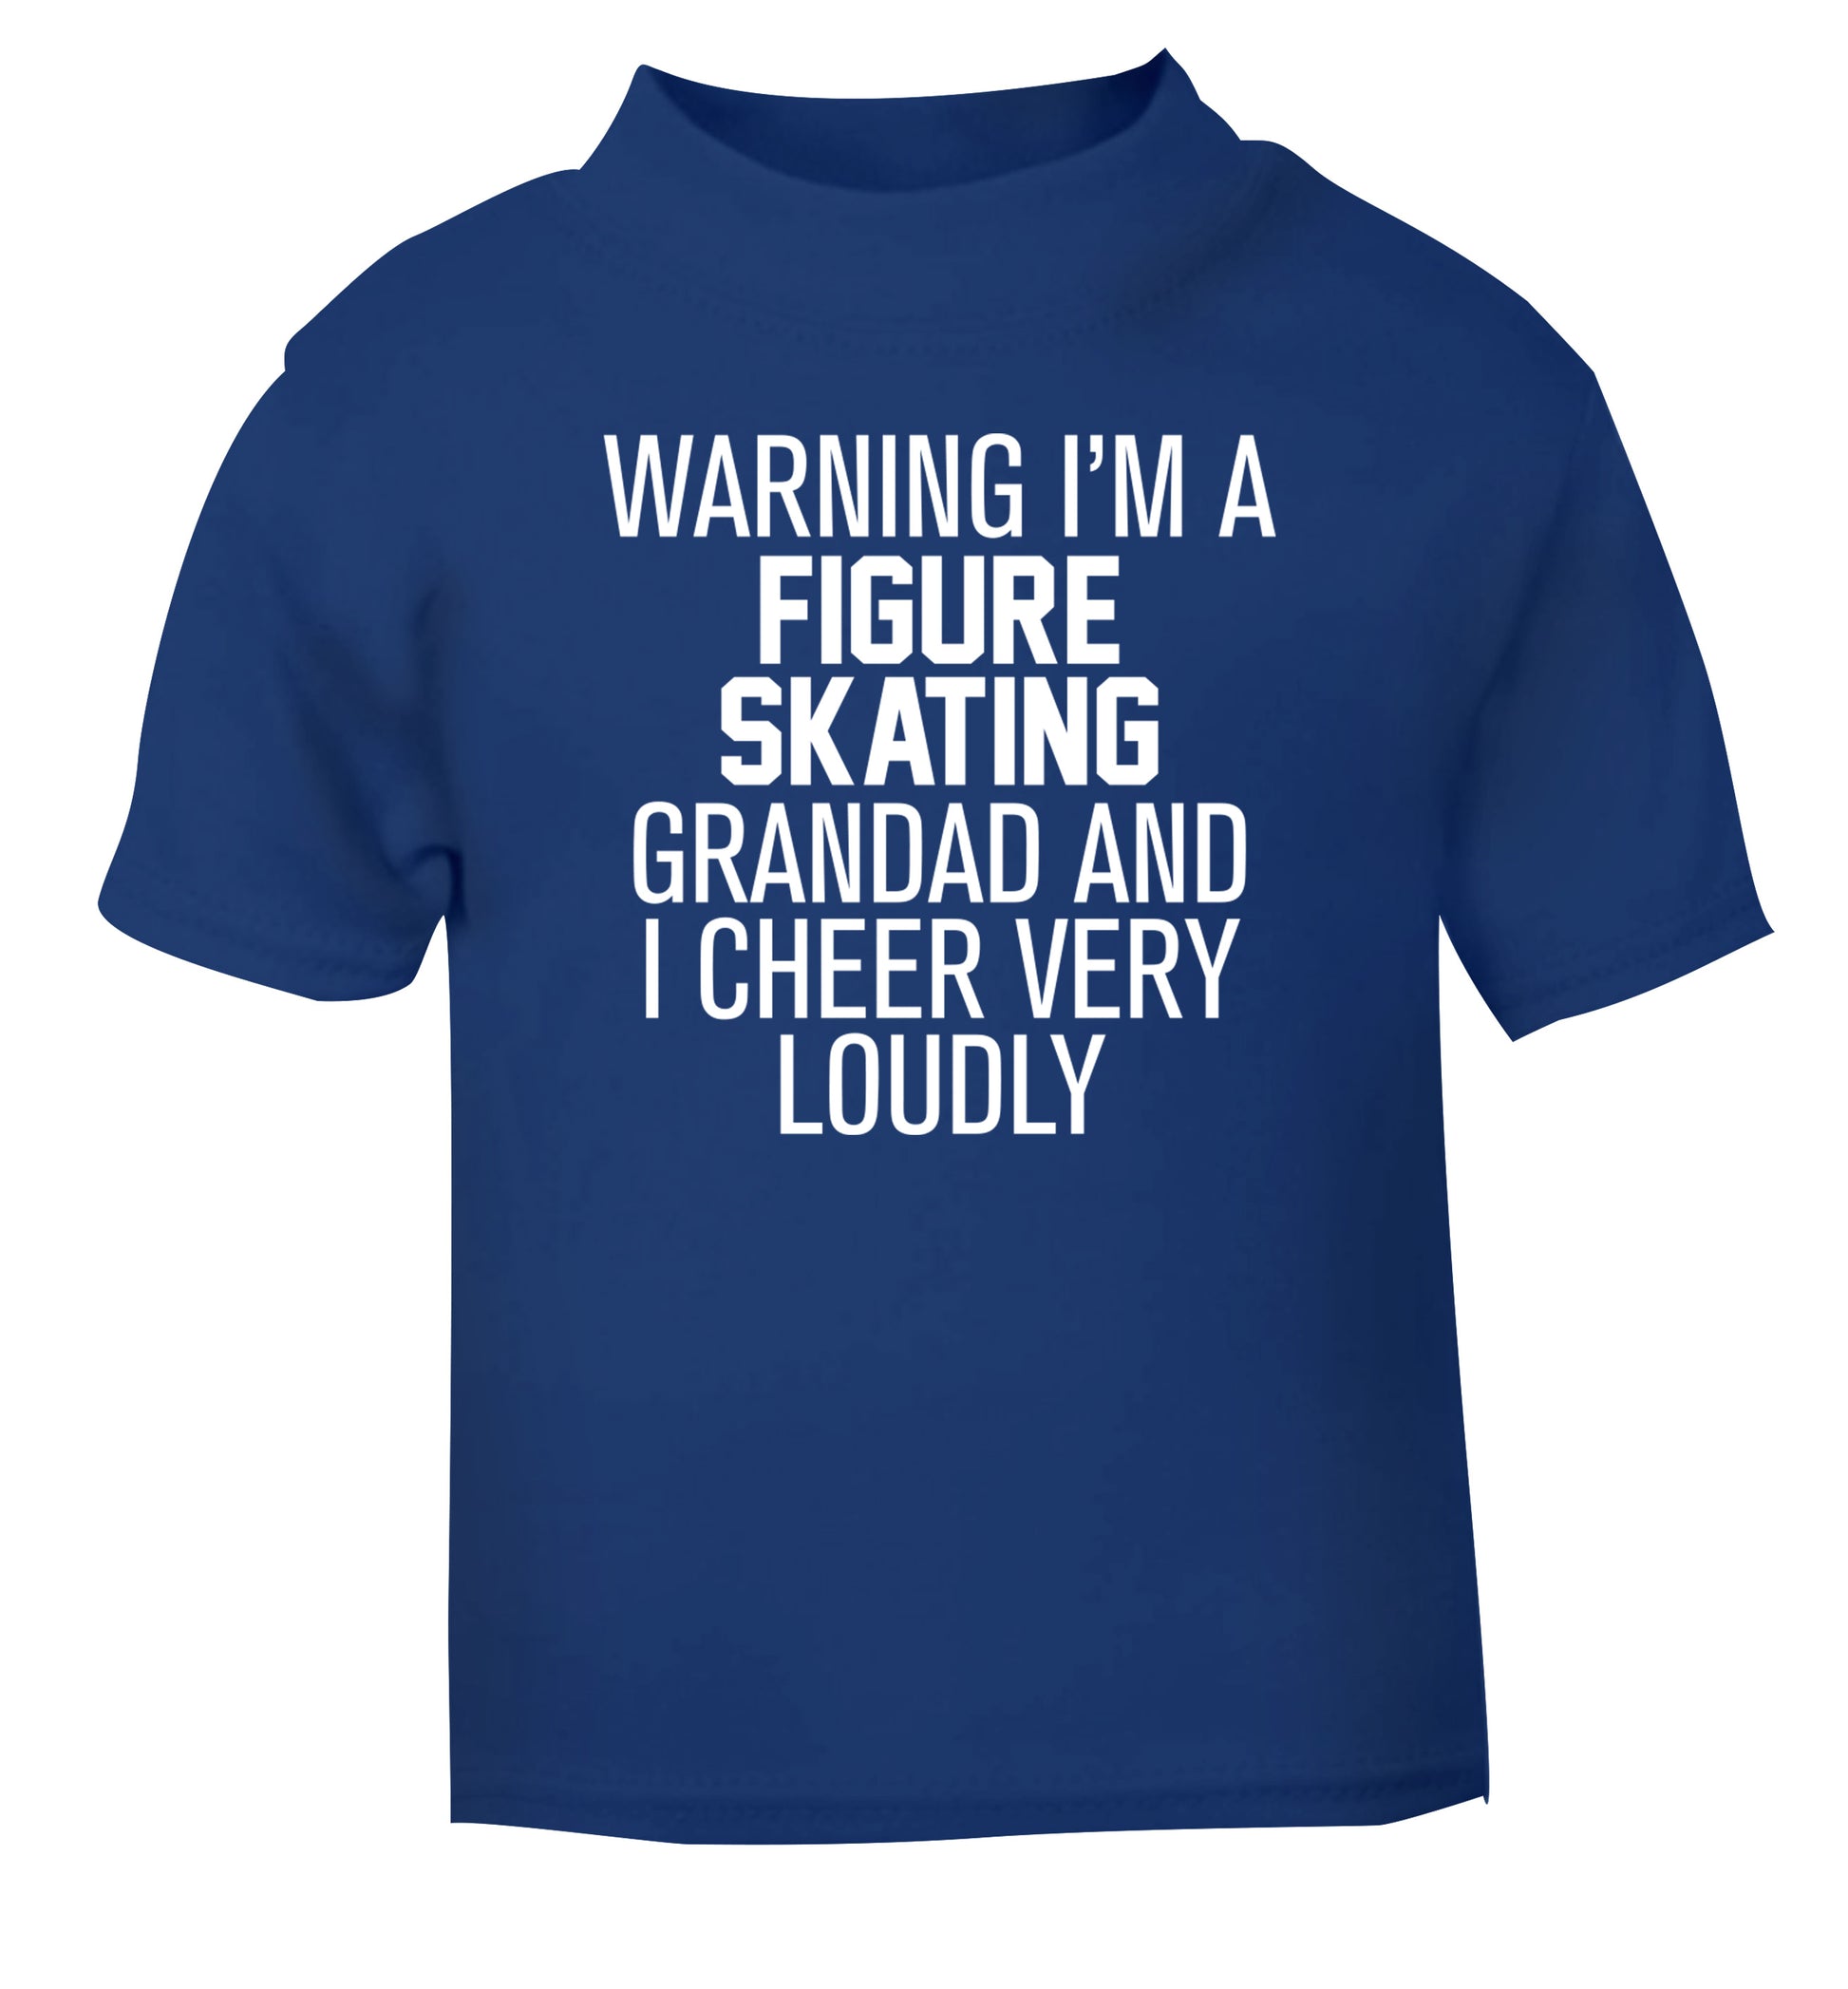 Warning I'm a figure skating grandad and I cheer very loudly blue Baby Toddler Tshirt 2 Years